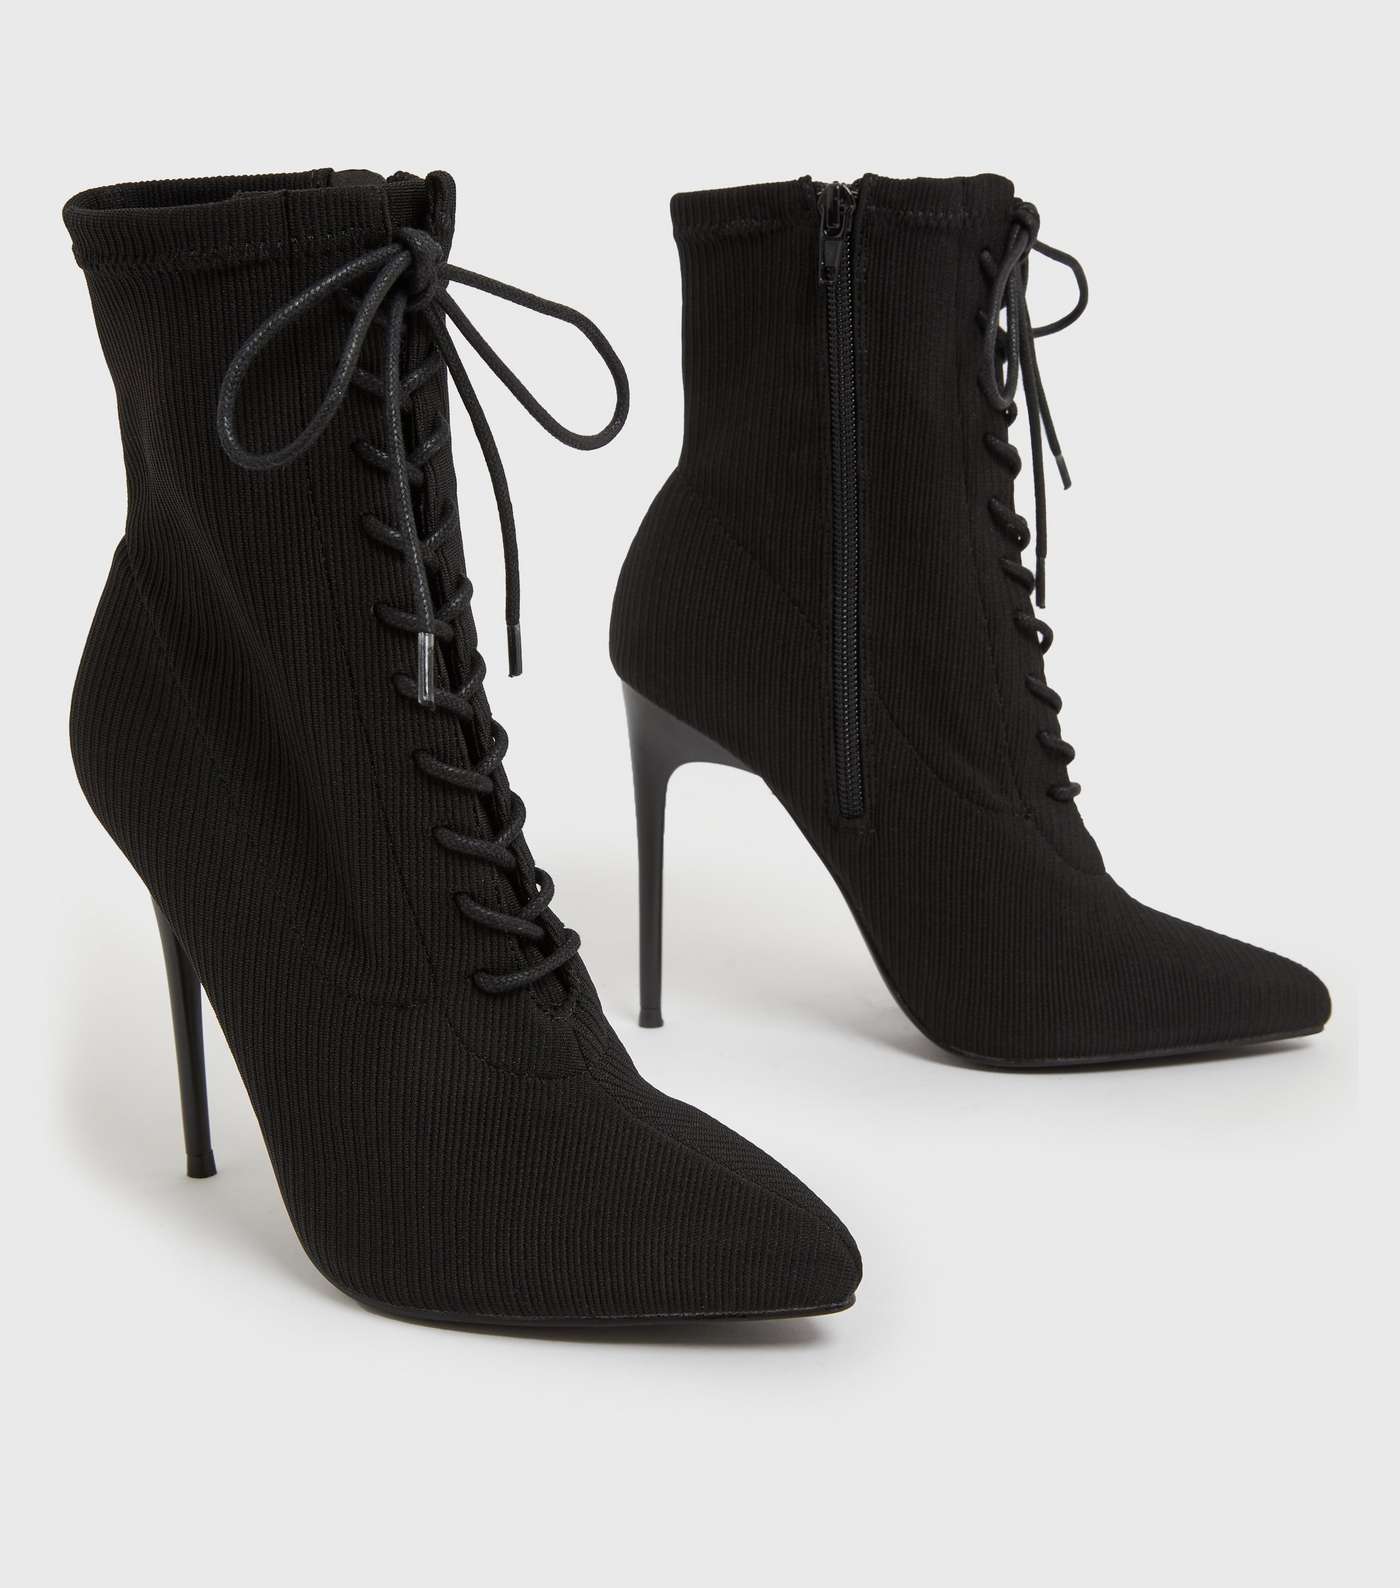 Black Knit Lace Up Stiletto Heel Ankle Boots Image 3